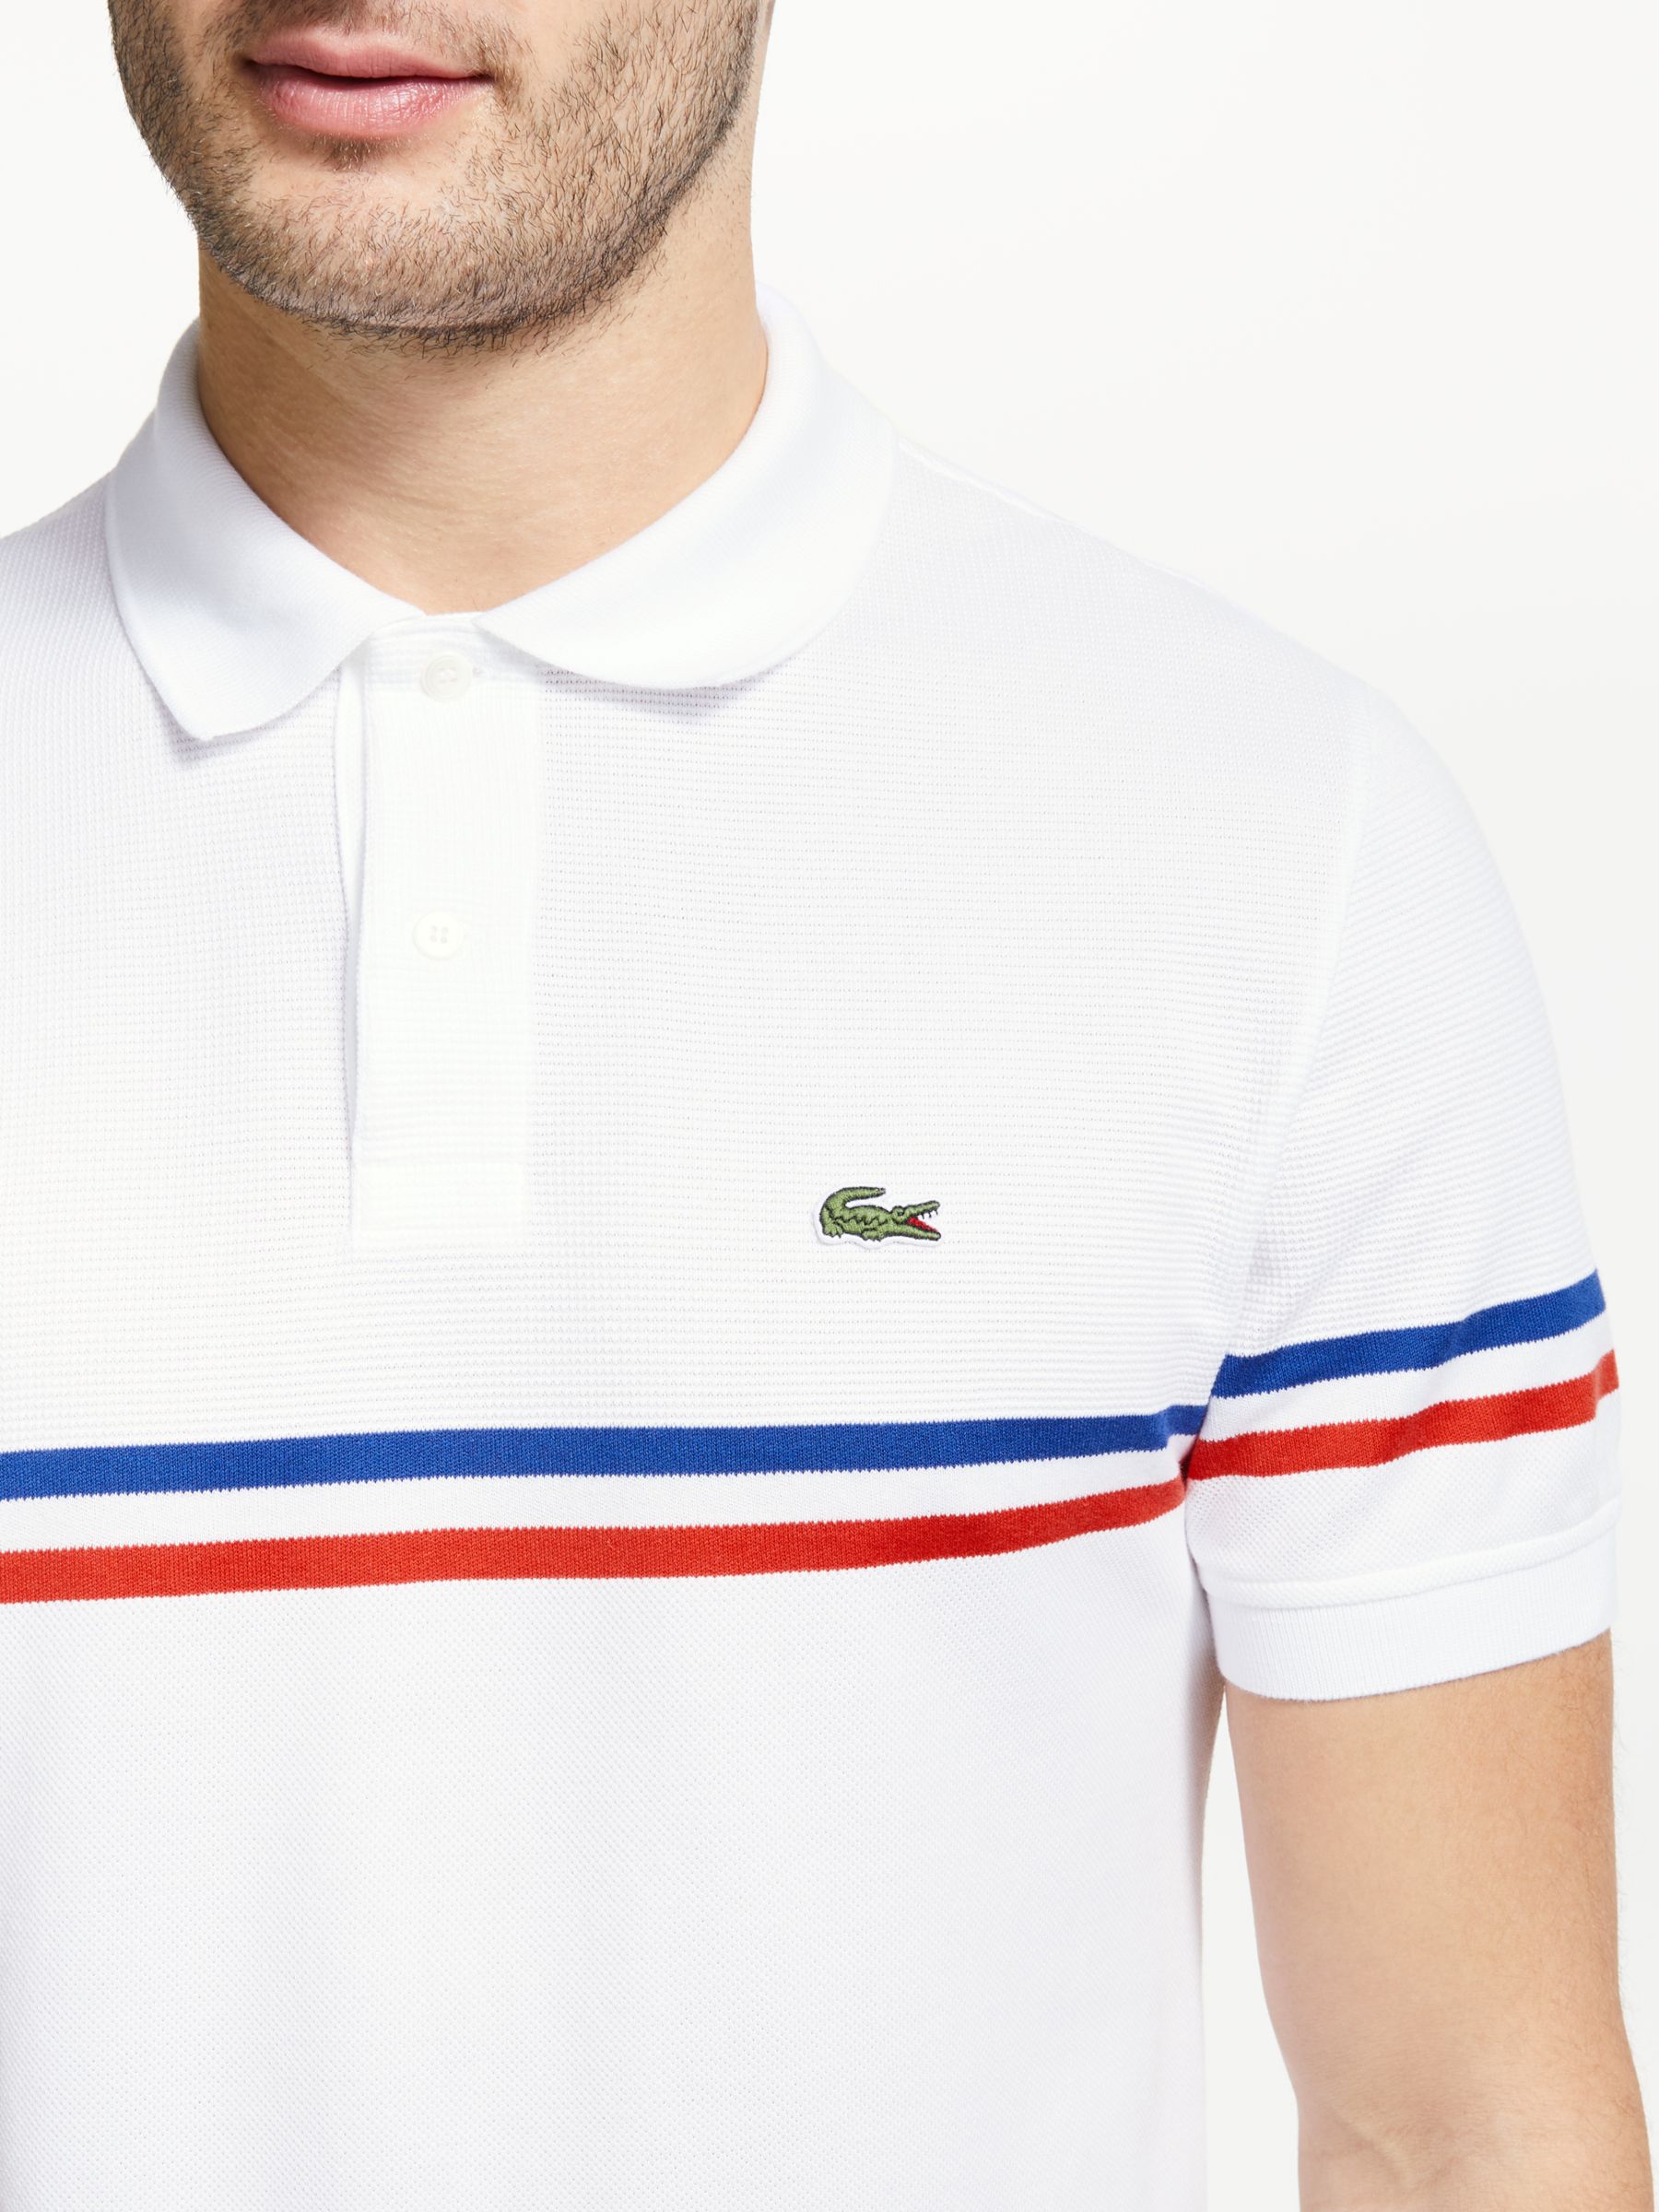 lacoste made